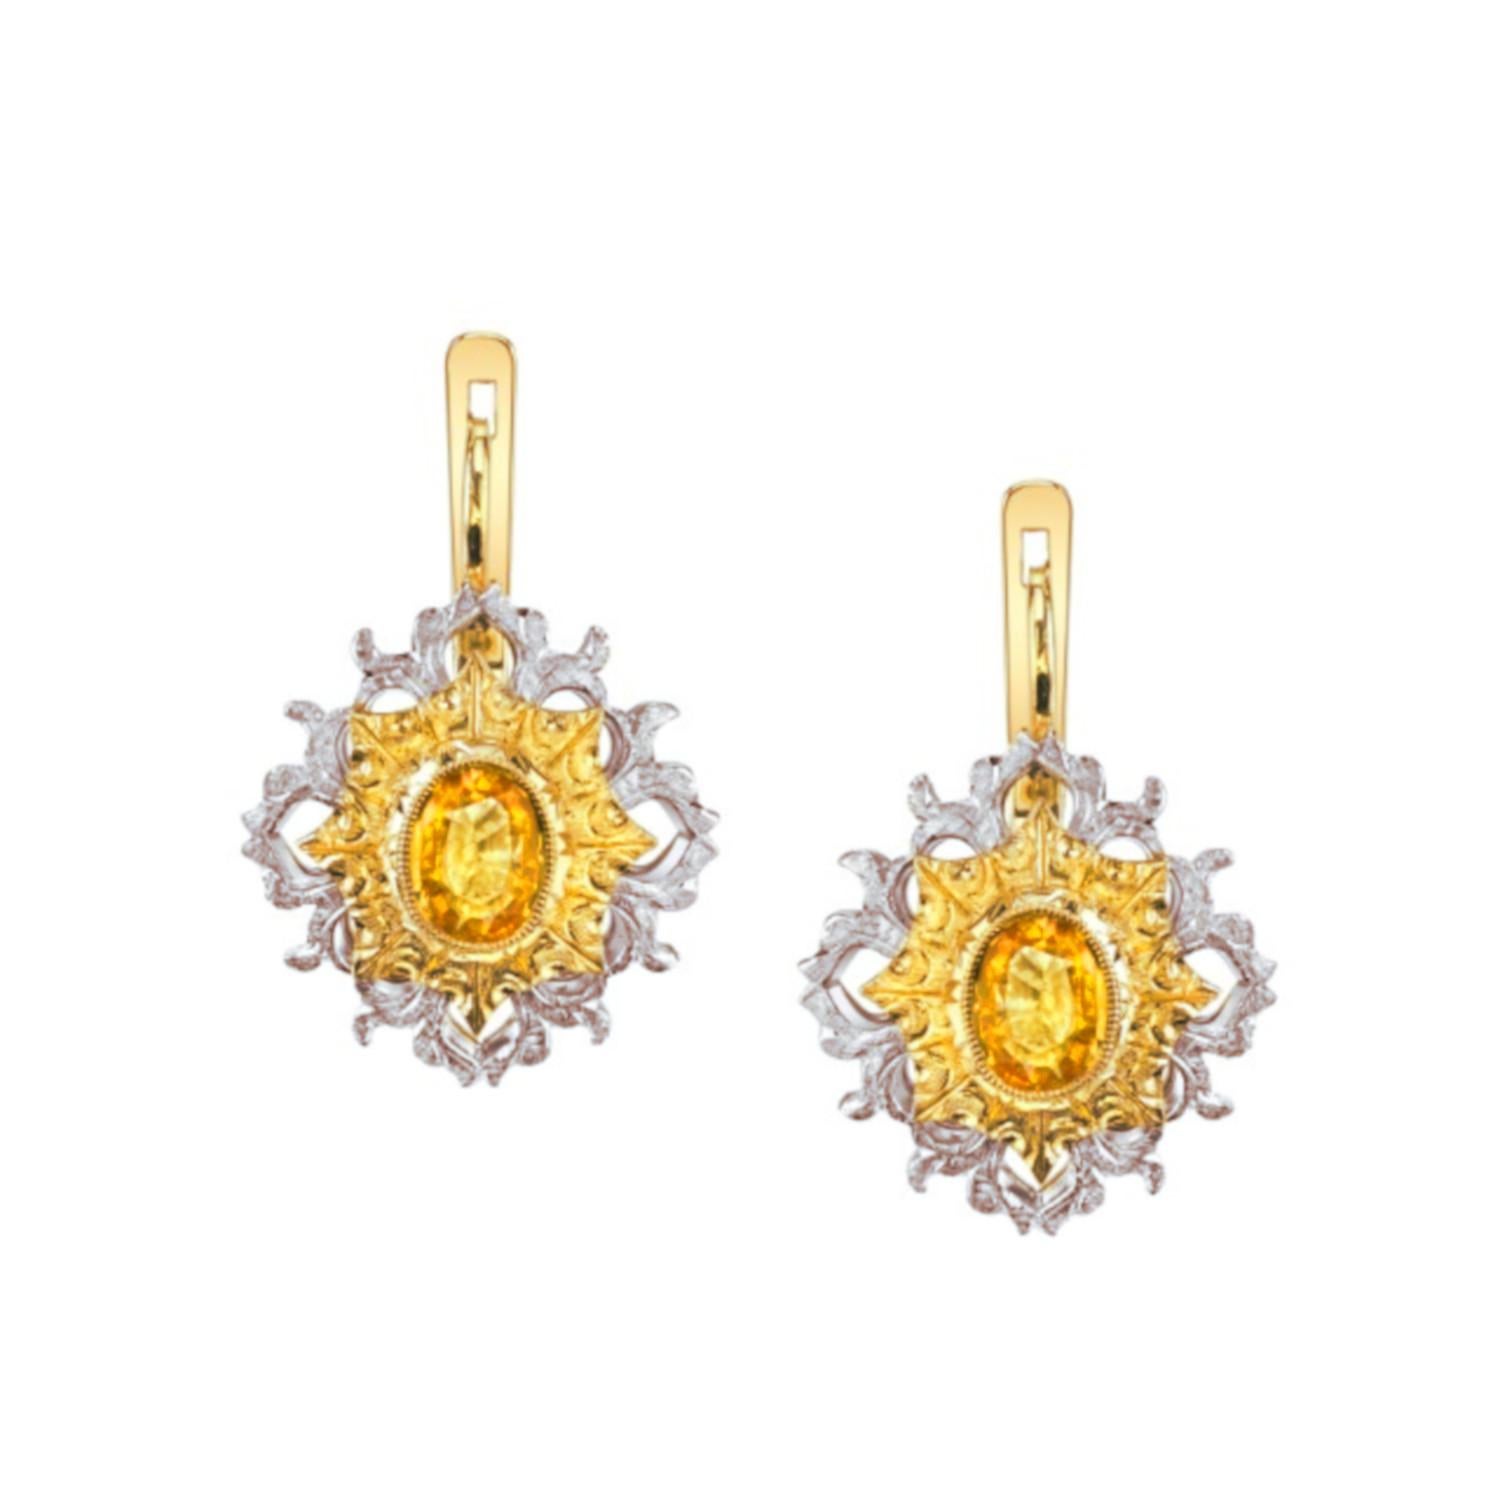 These spectacular yellow sapphire drop earrings were hand crafted in 18k white and yellow gold by our Master Jewelers in Los Angeles and feature a beautifully matched pair of deep lemon-yellow color sapphires! The bezel set sapphires are  framed